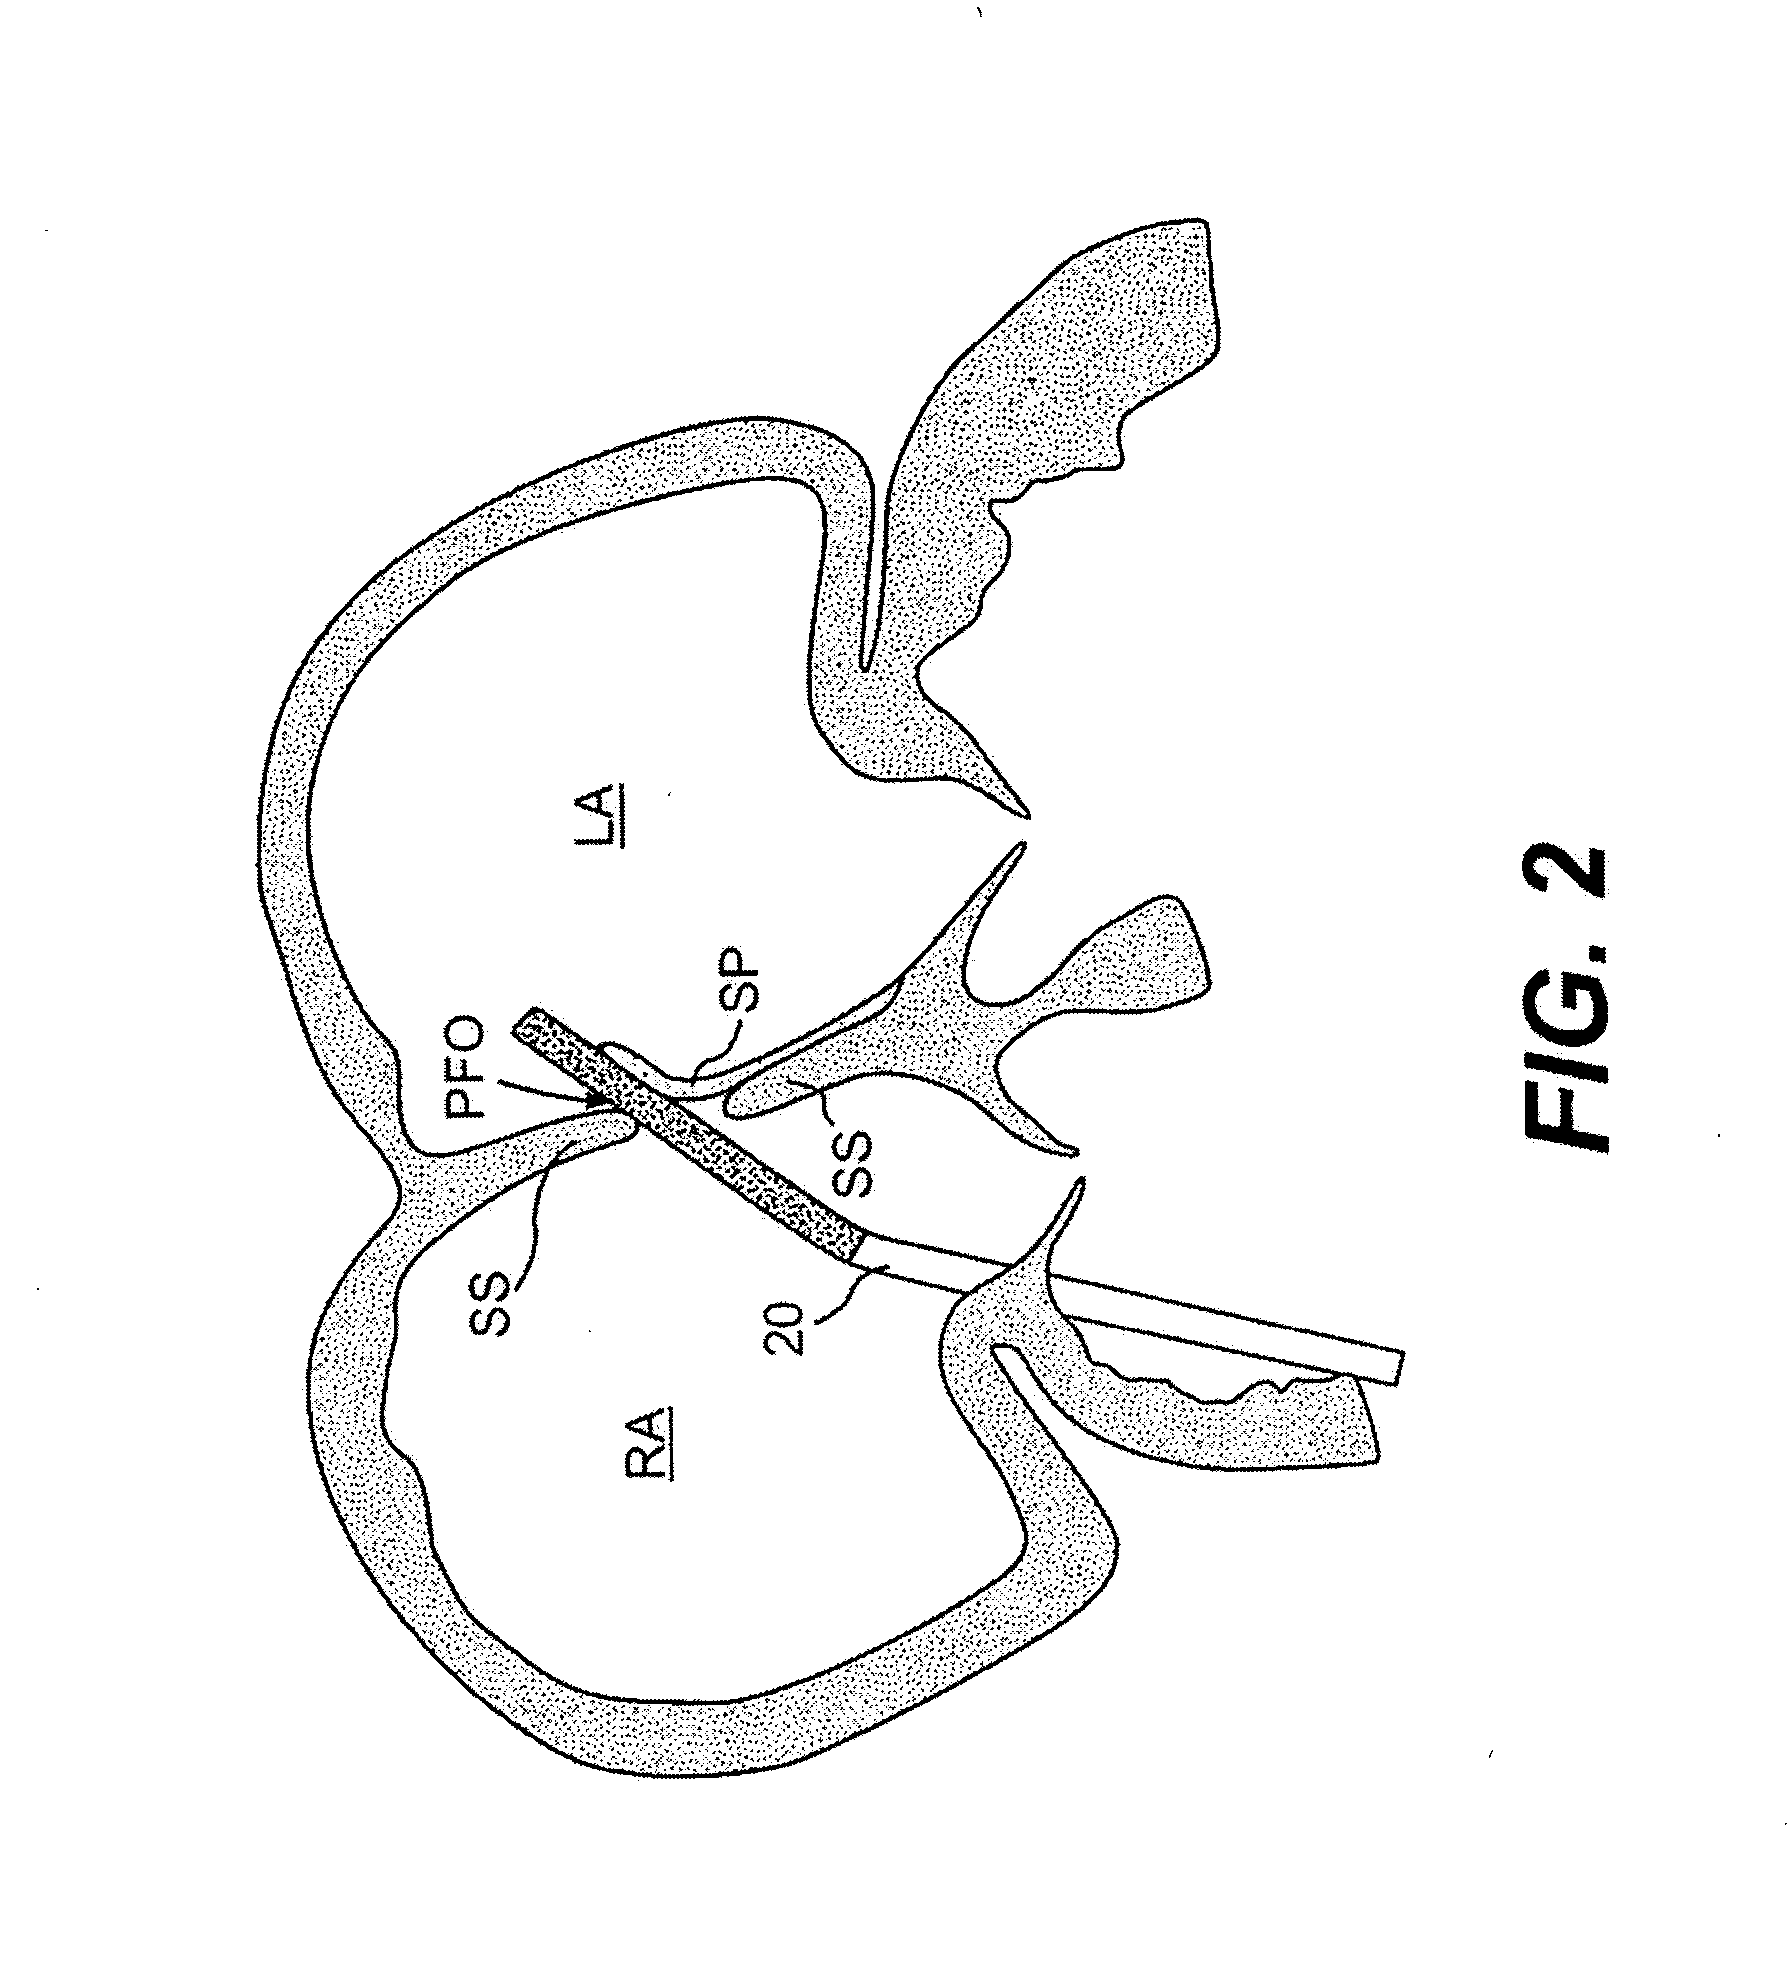 Closure devices, related delivery methods and tools, and related methods of use